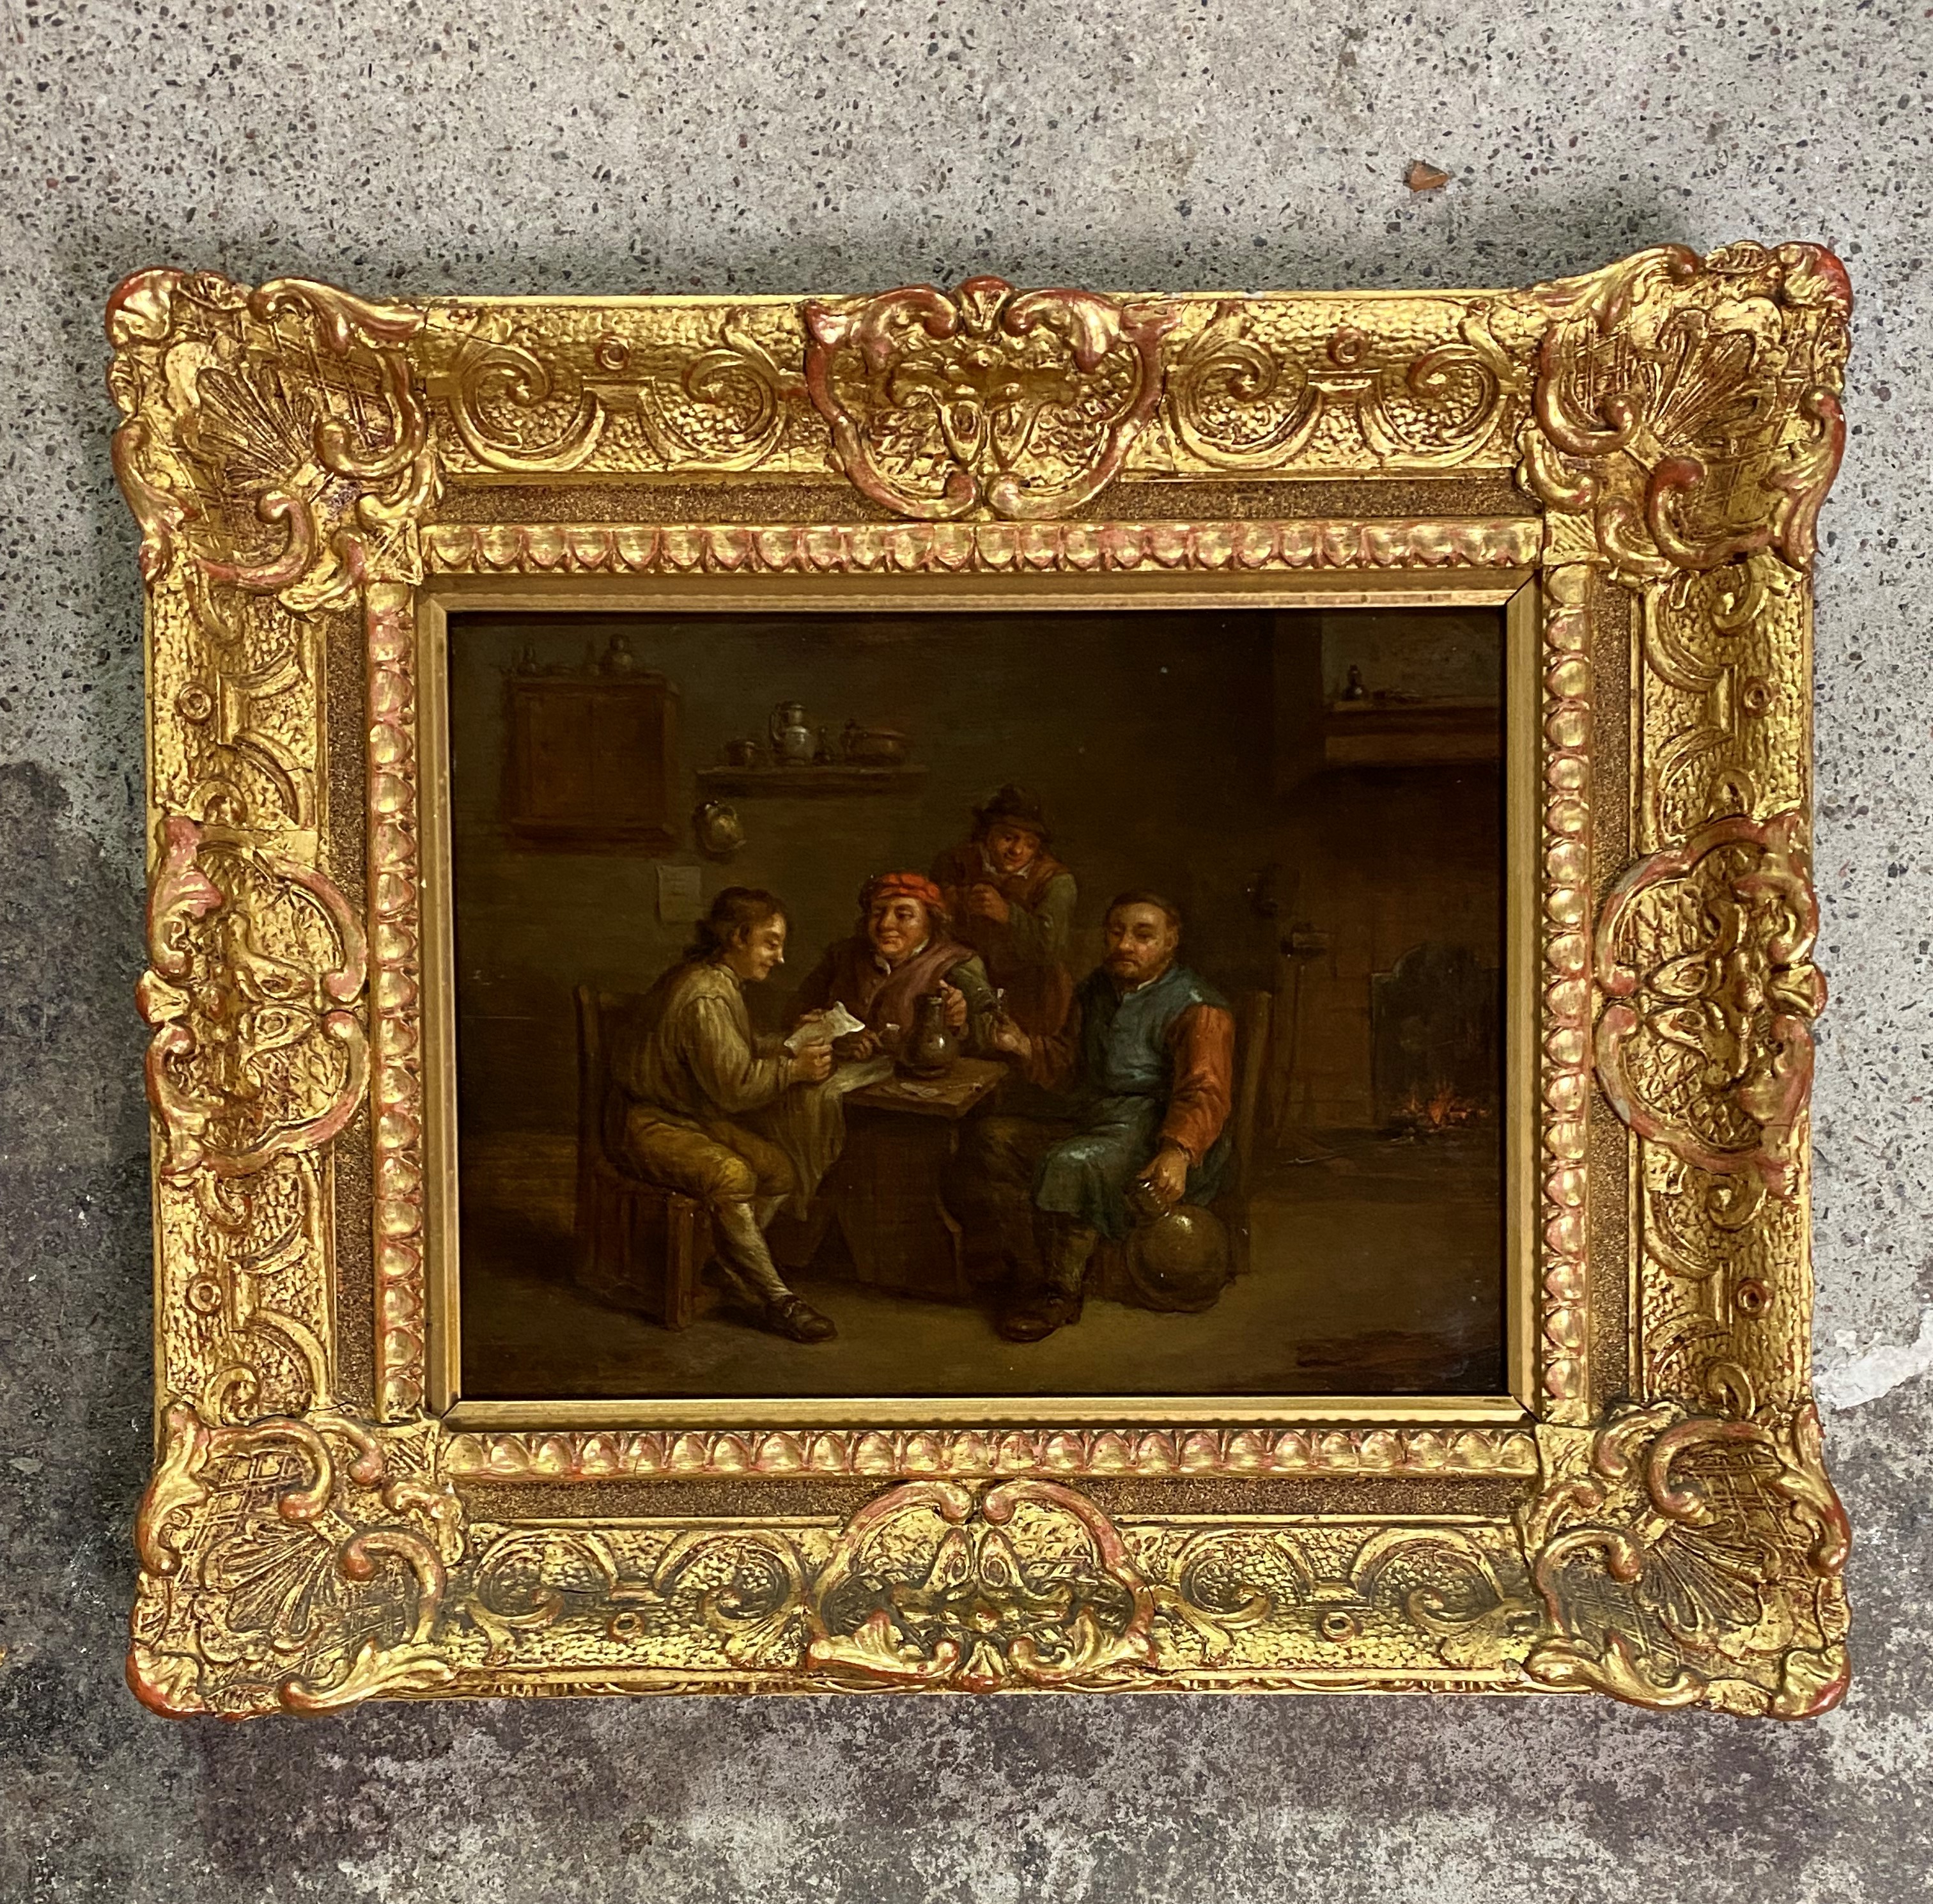 Follower of David Teniers (Flemish 1610-90), Figures at a Tavern Table, signed "D. Teniers pinxt" - Image 2 of 2